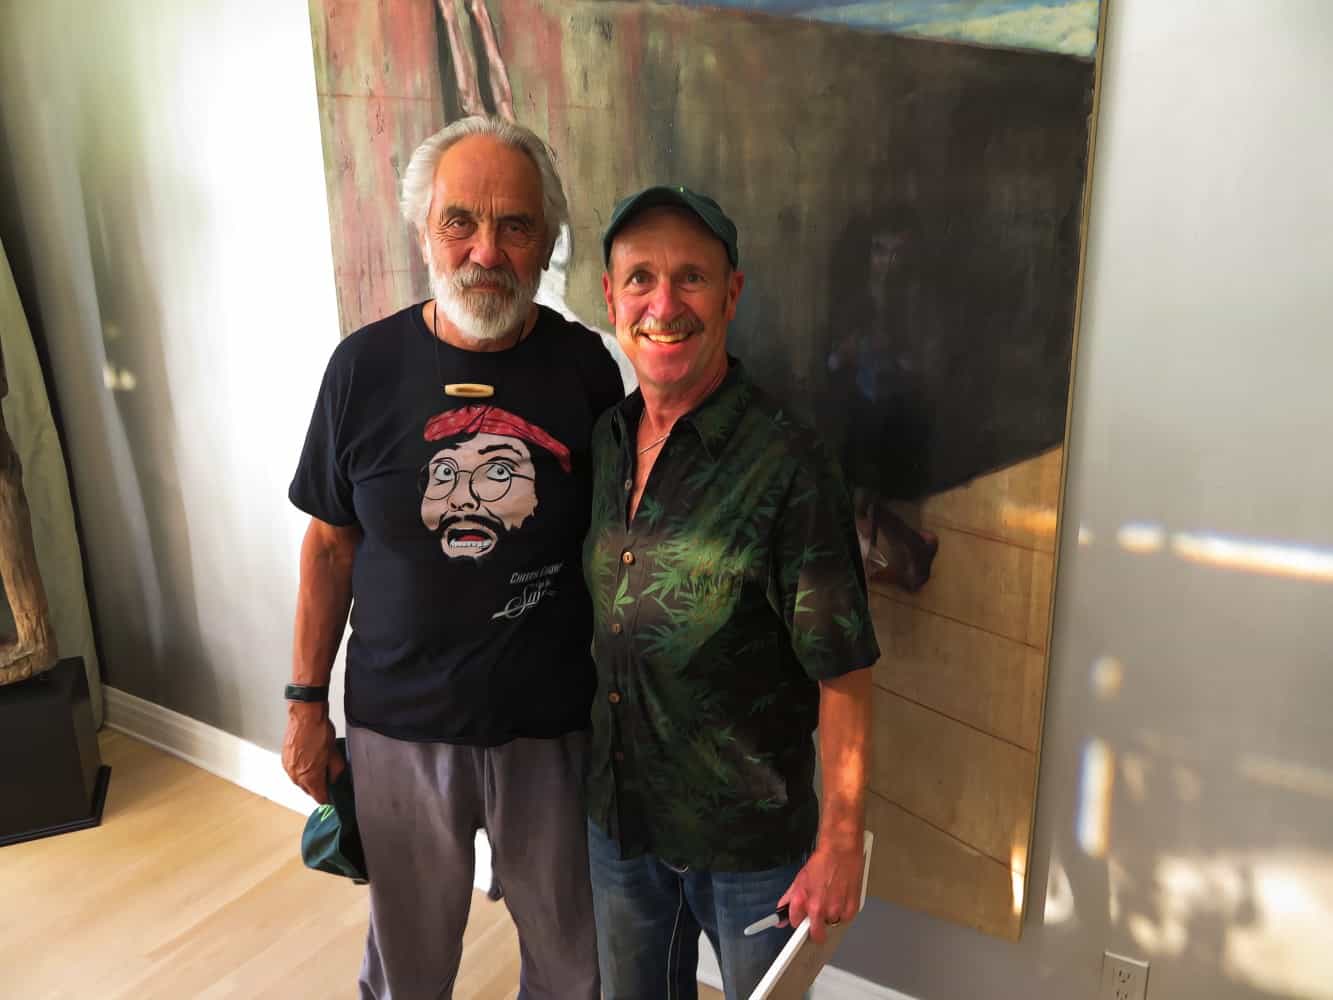 Tommy Chong and DP Mark Schulze Fighting Cancer with Cannabis